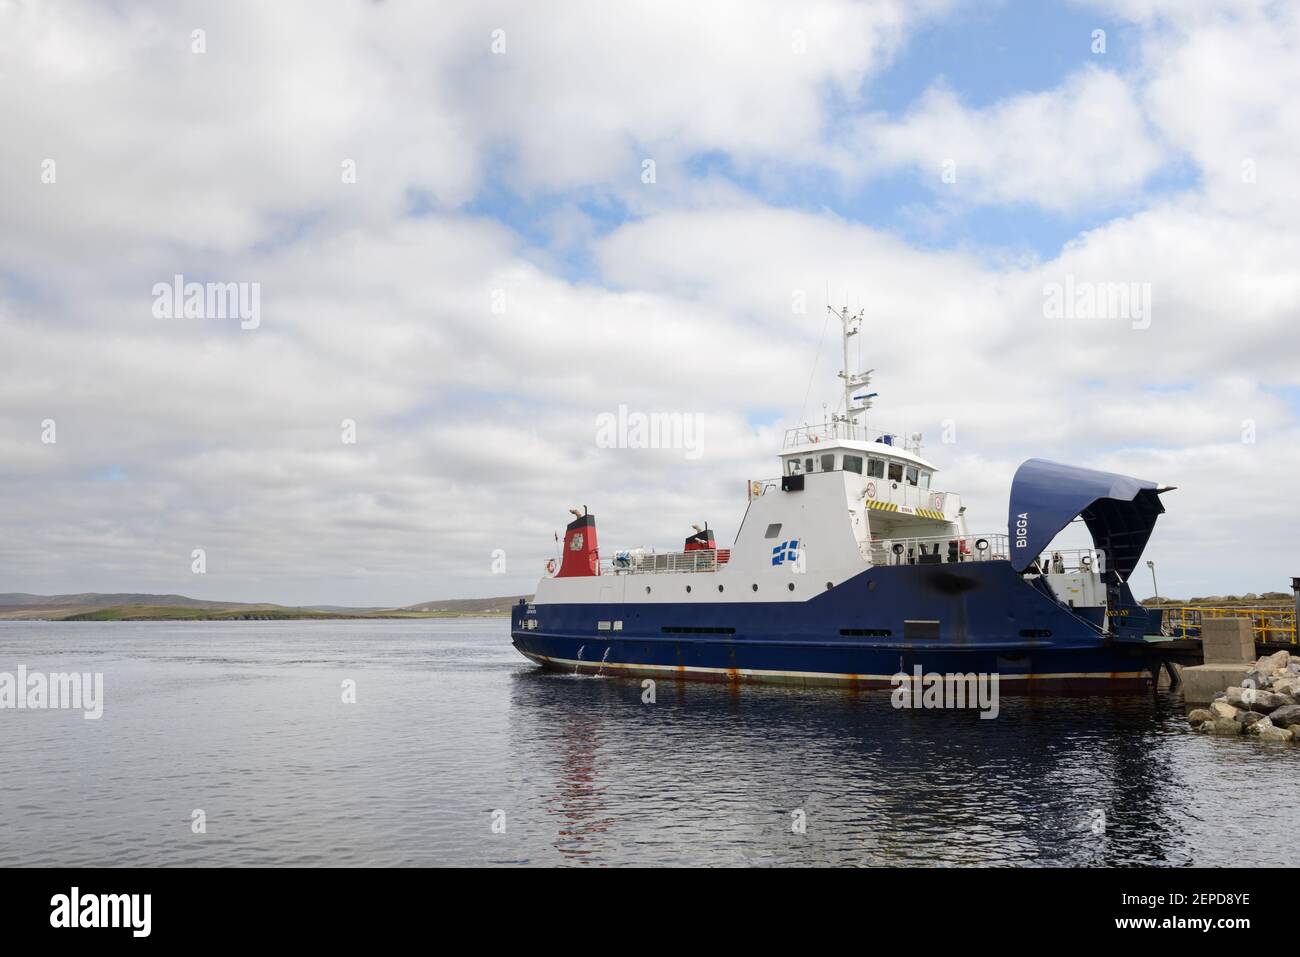 A ferry waiting to load cars for transport between the islands of Yell and Unst, Shetland. Stock Photo